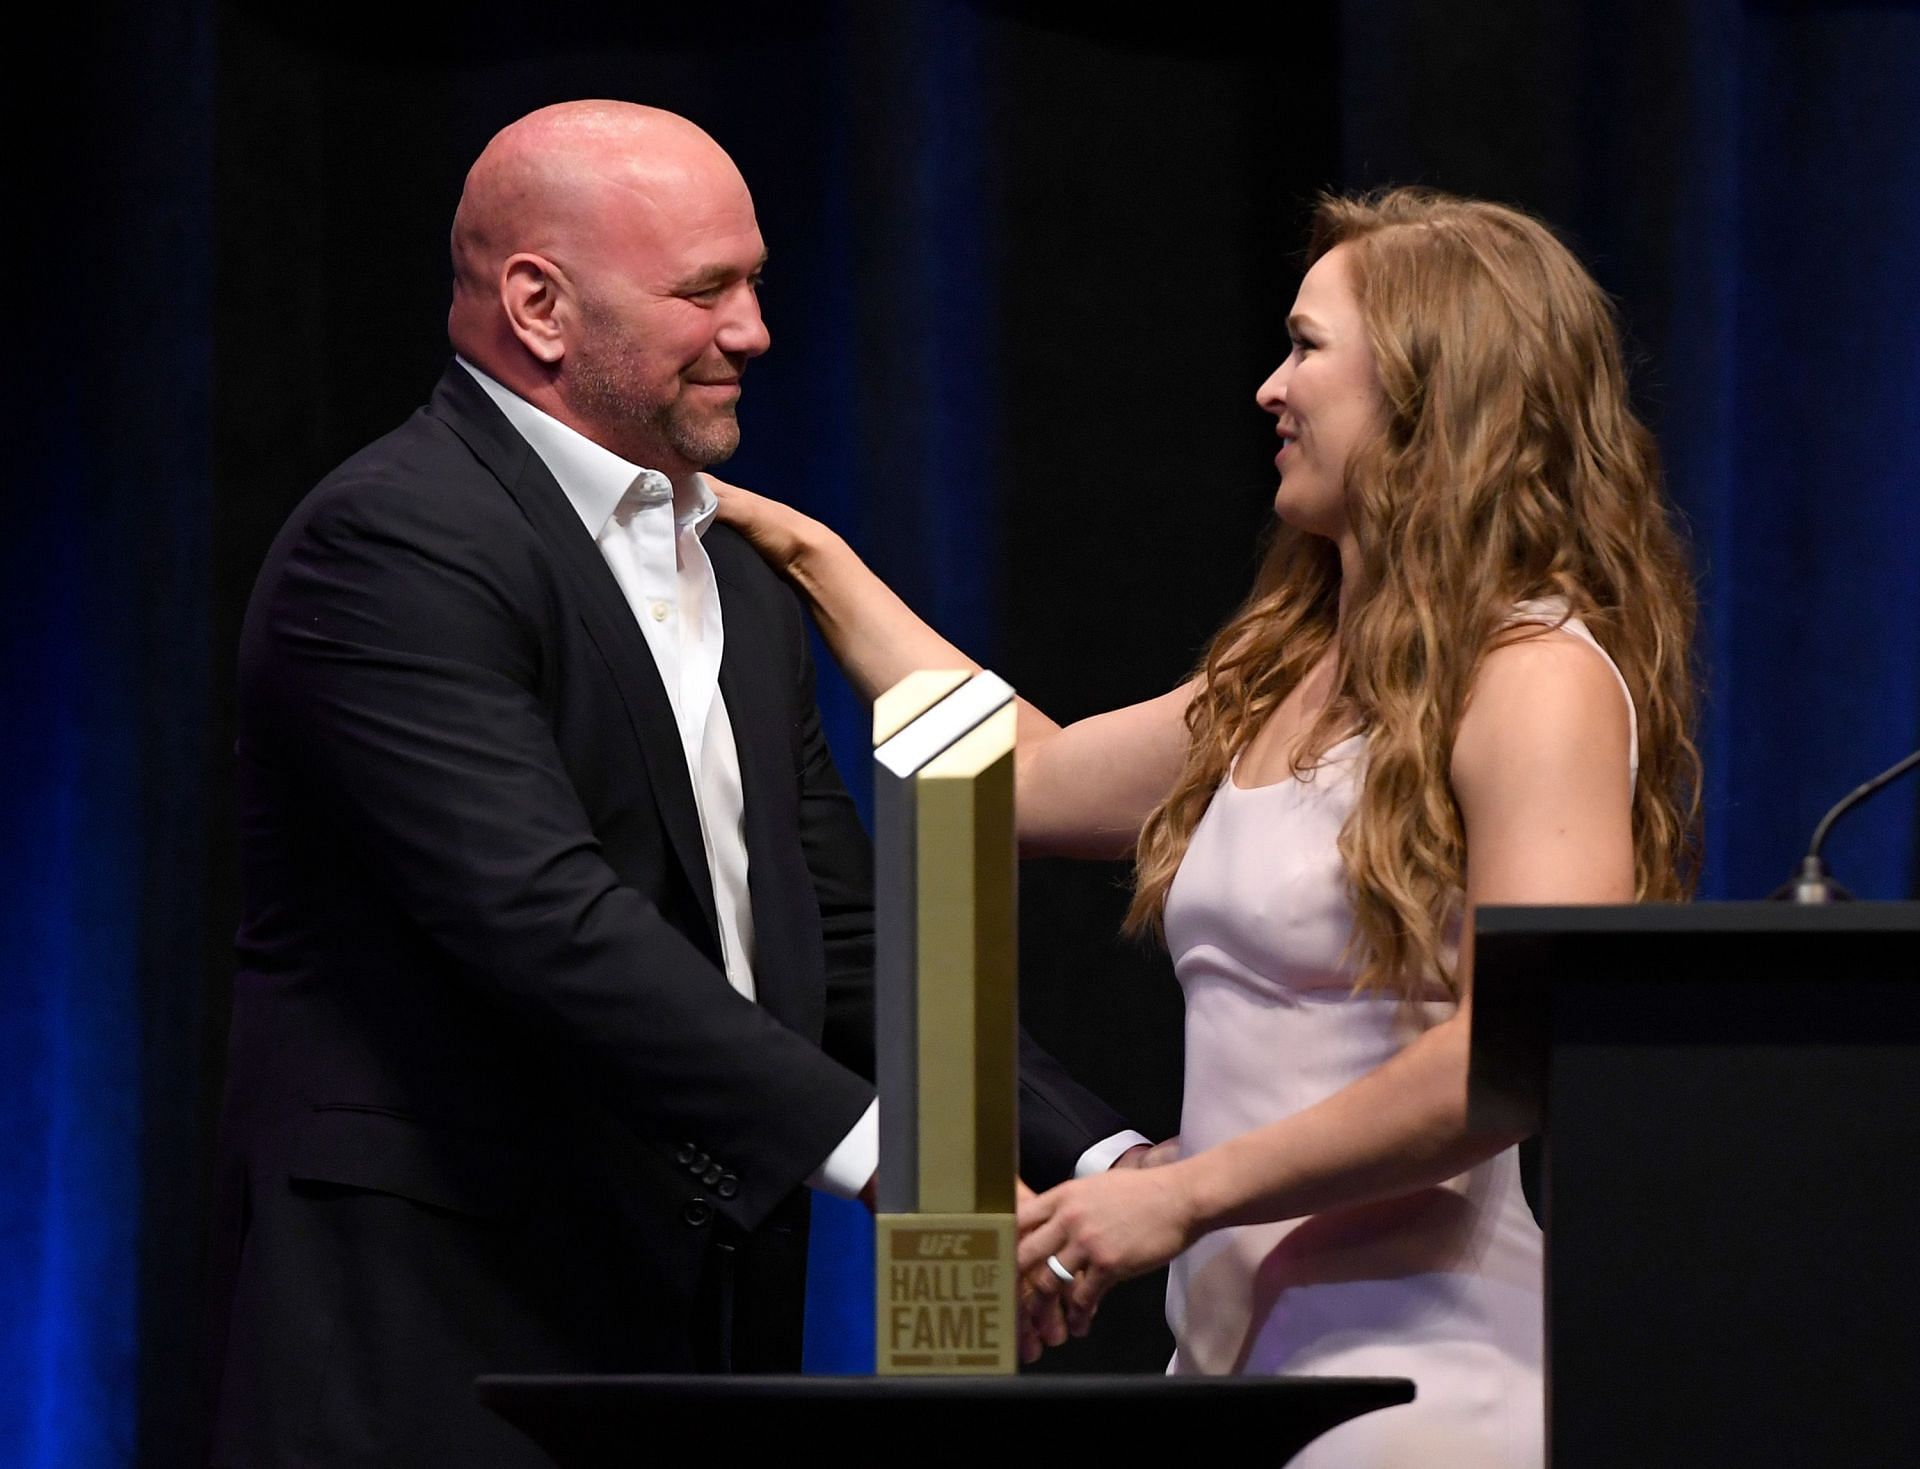 Dana White (left) and Olympic Bronze Medalist Ronda Rousey (right) (Images via Getty)